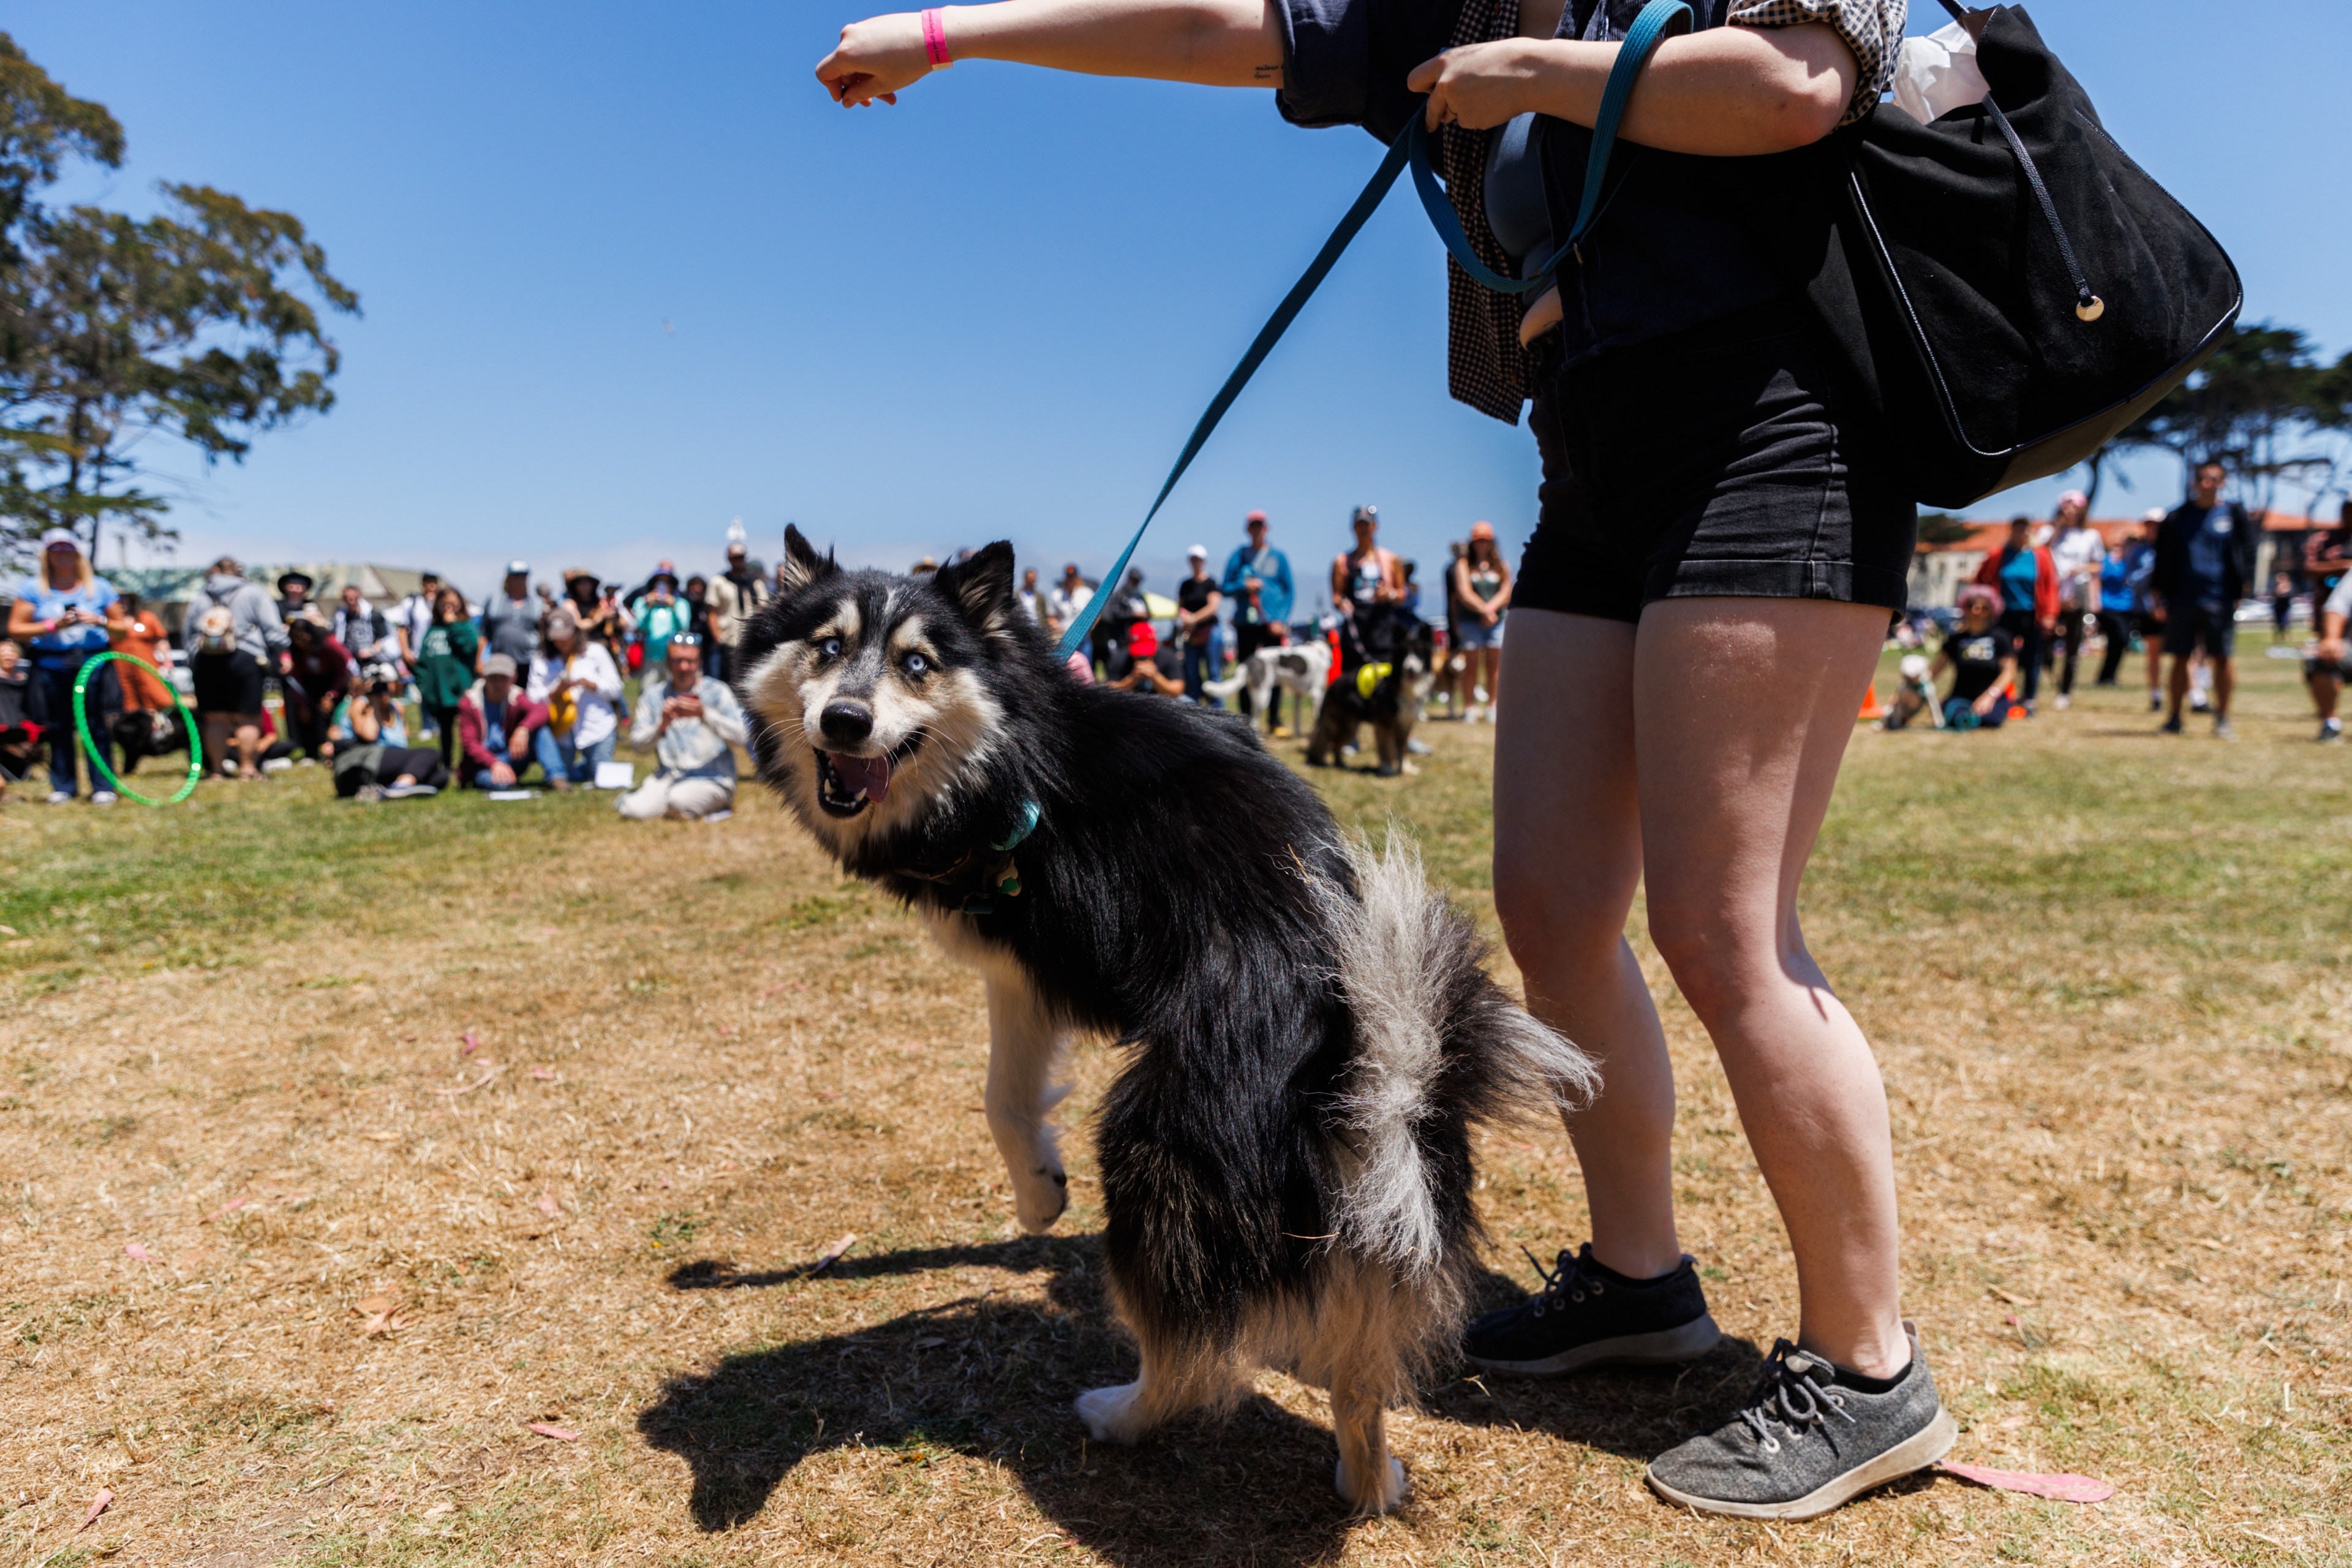 A fluffy black and white dog on a leash stands in a park, looking back happily. The handler has short, dark shorts and many people are gathered in the background.